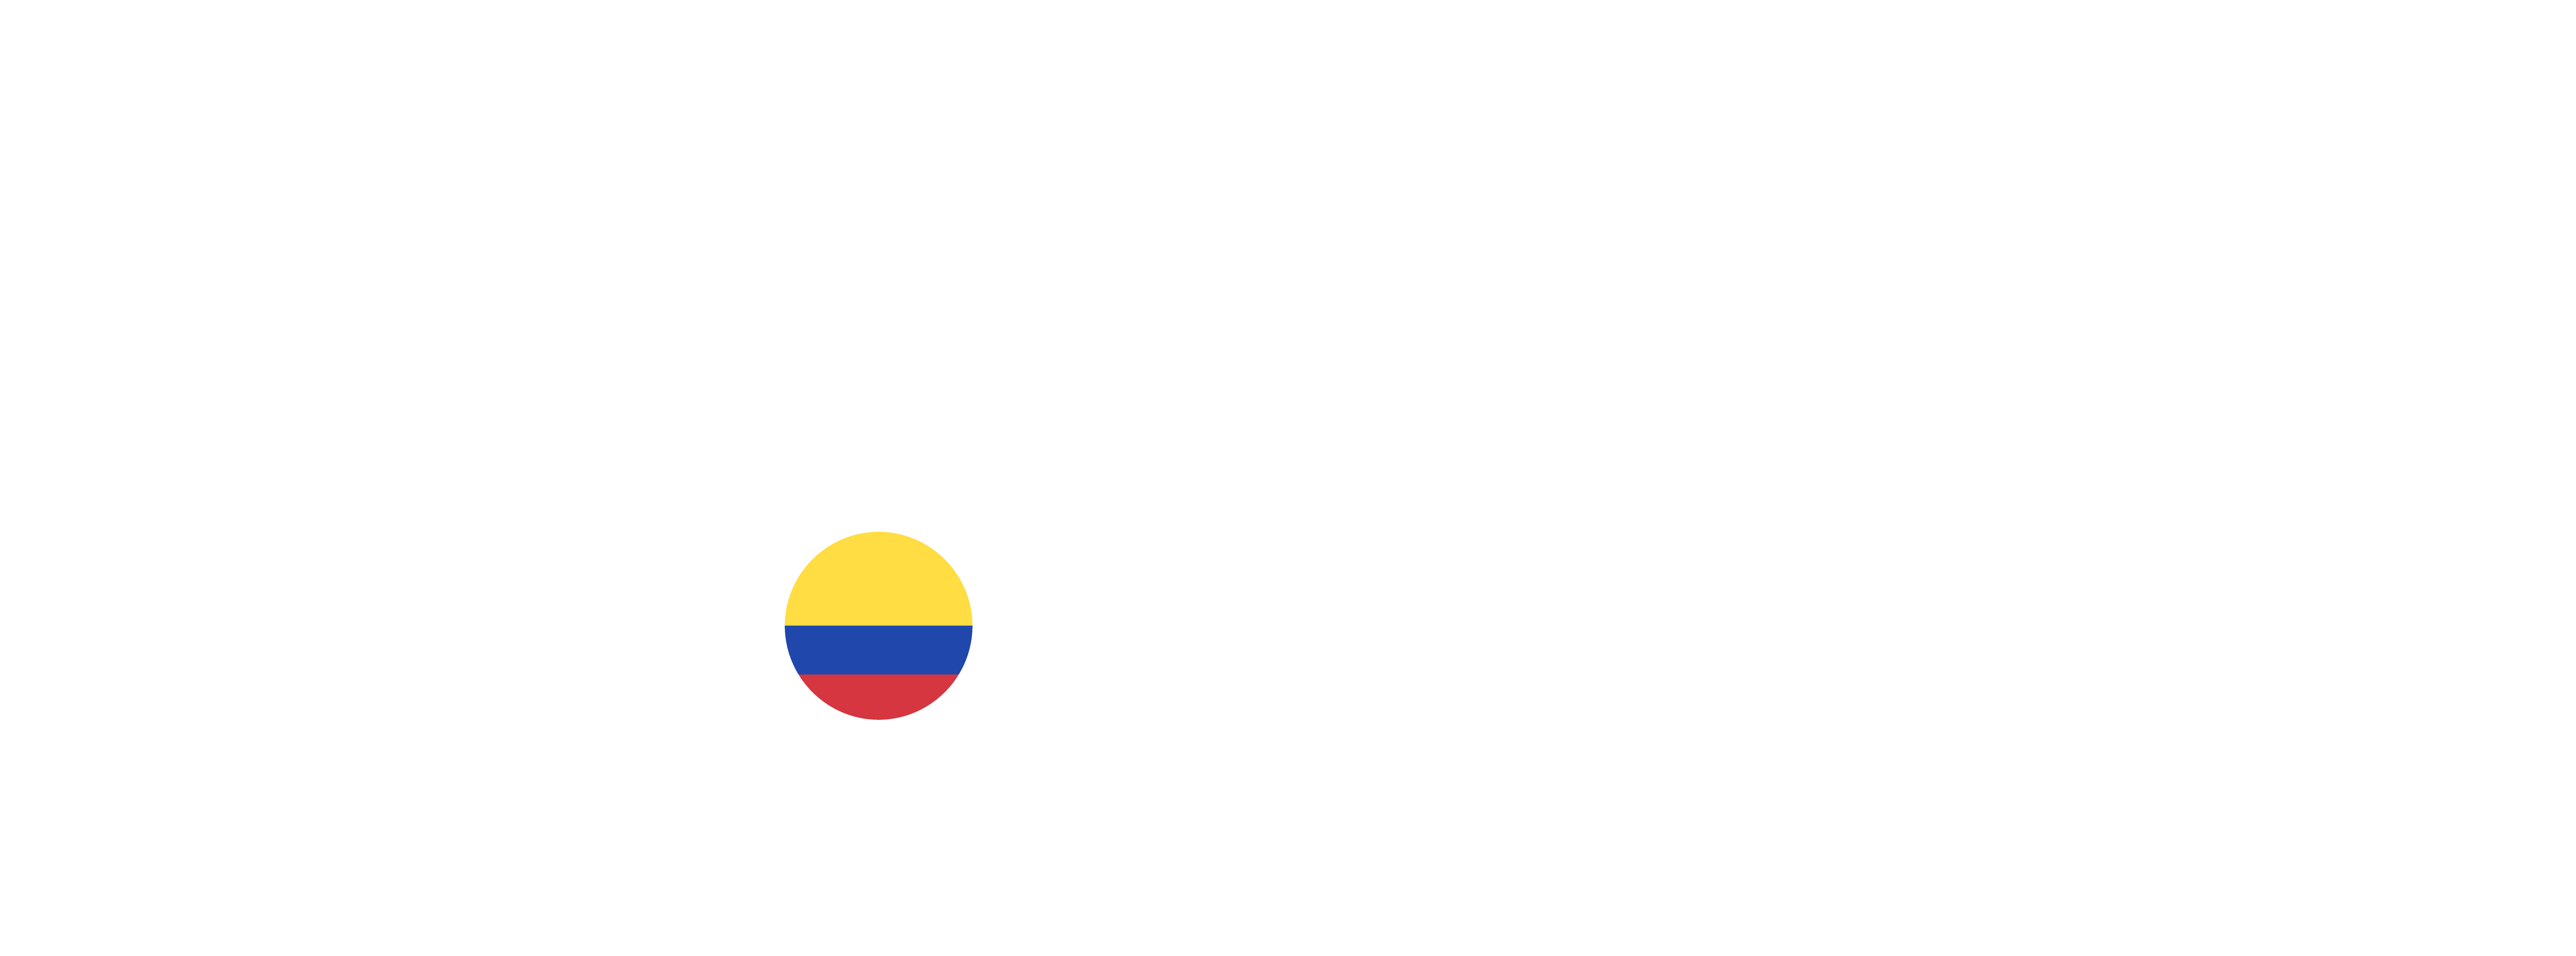 IVAO COLOMBIA ICON